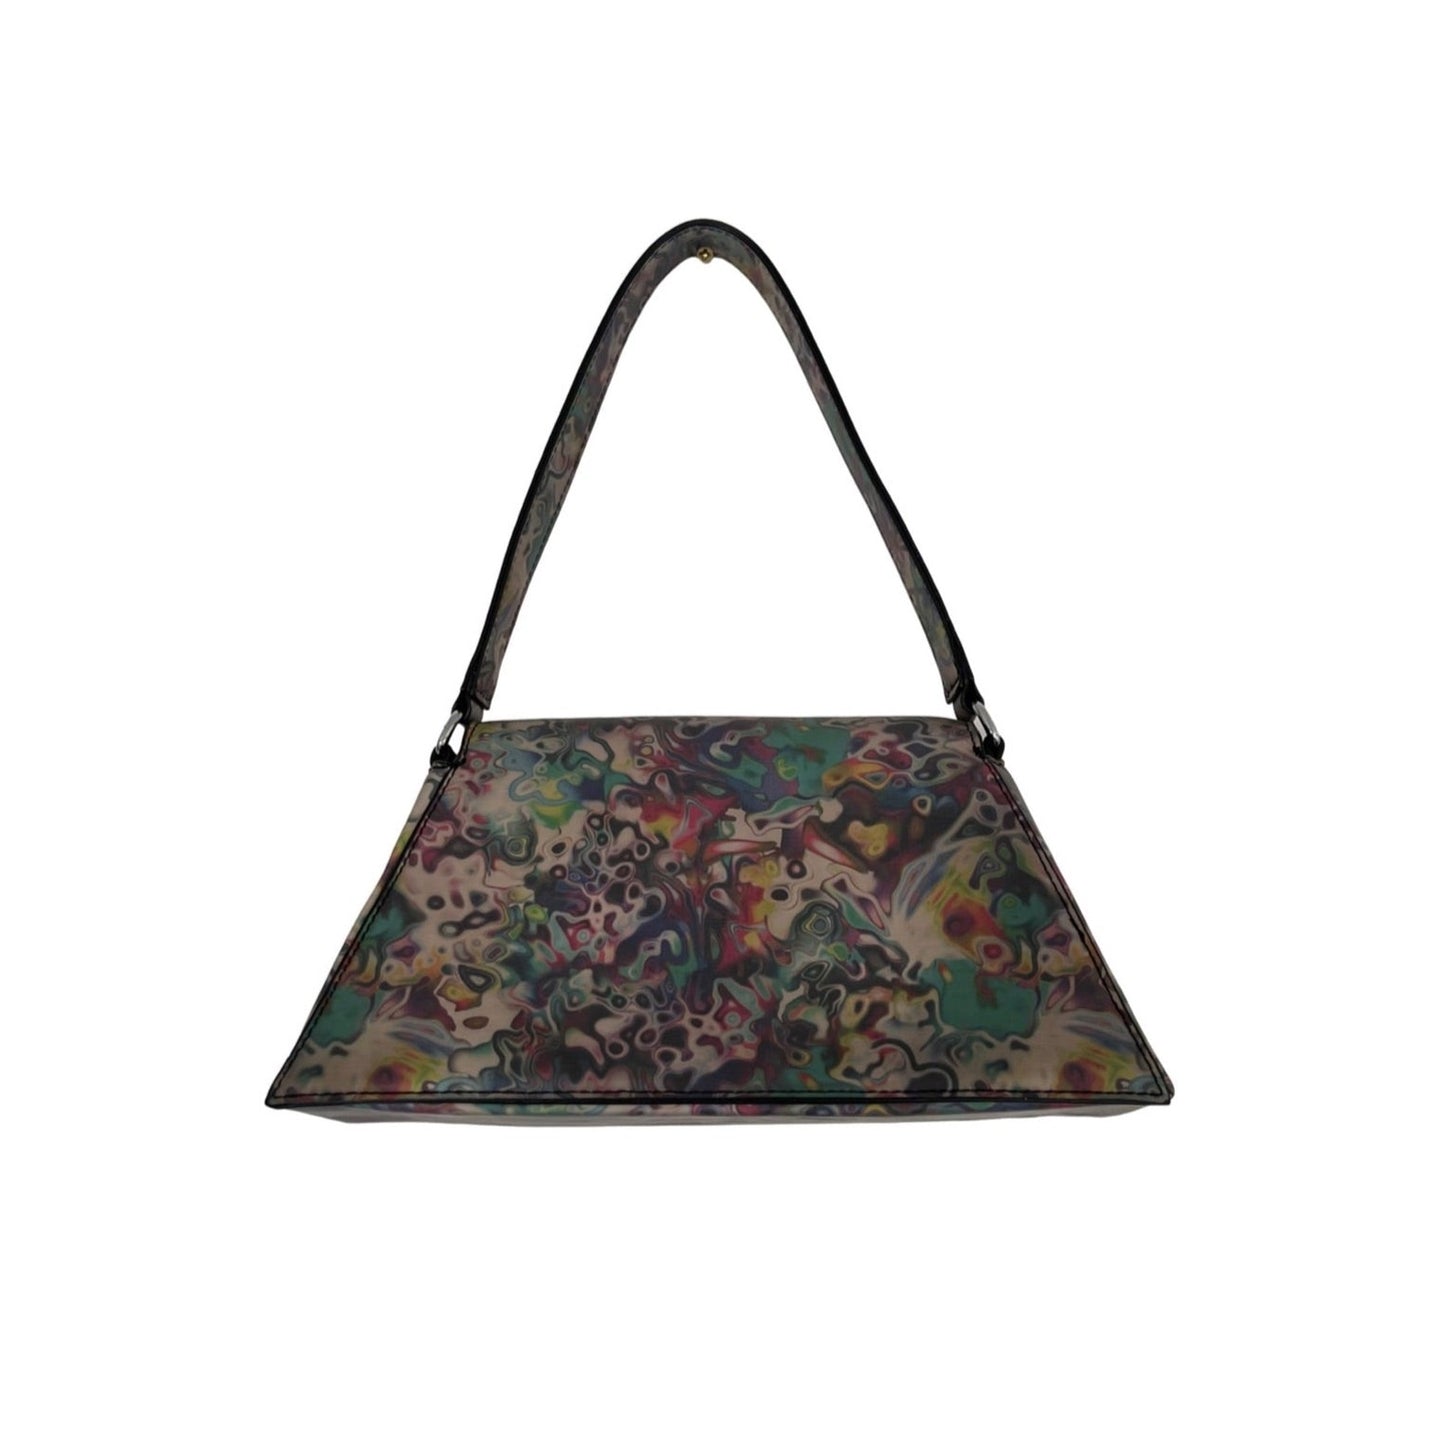 ‘The Lucid’ Jewelled Bag